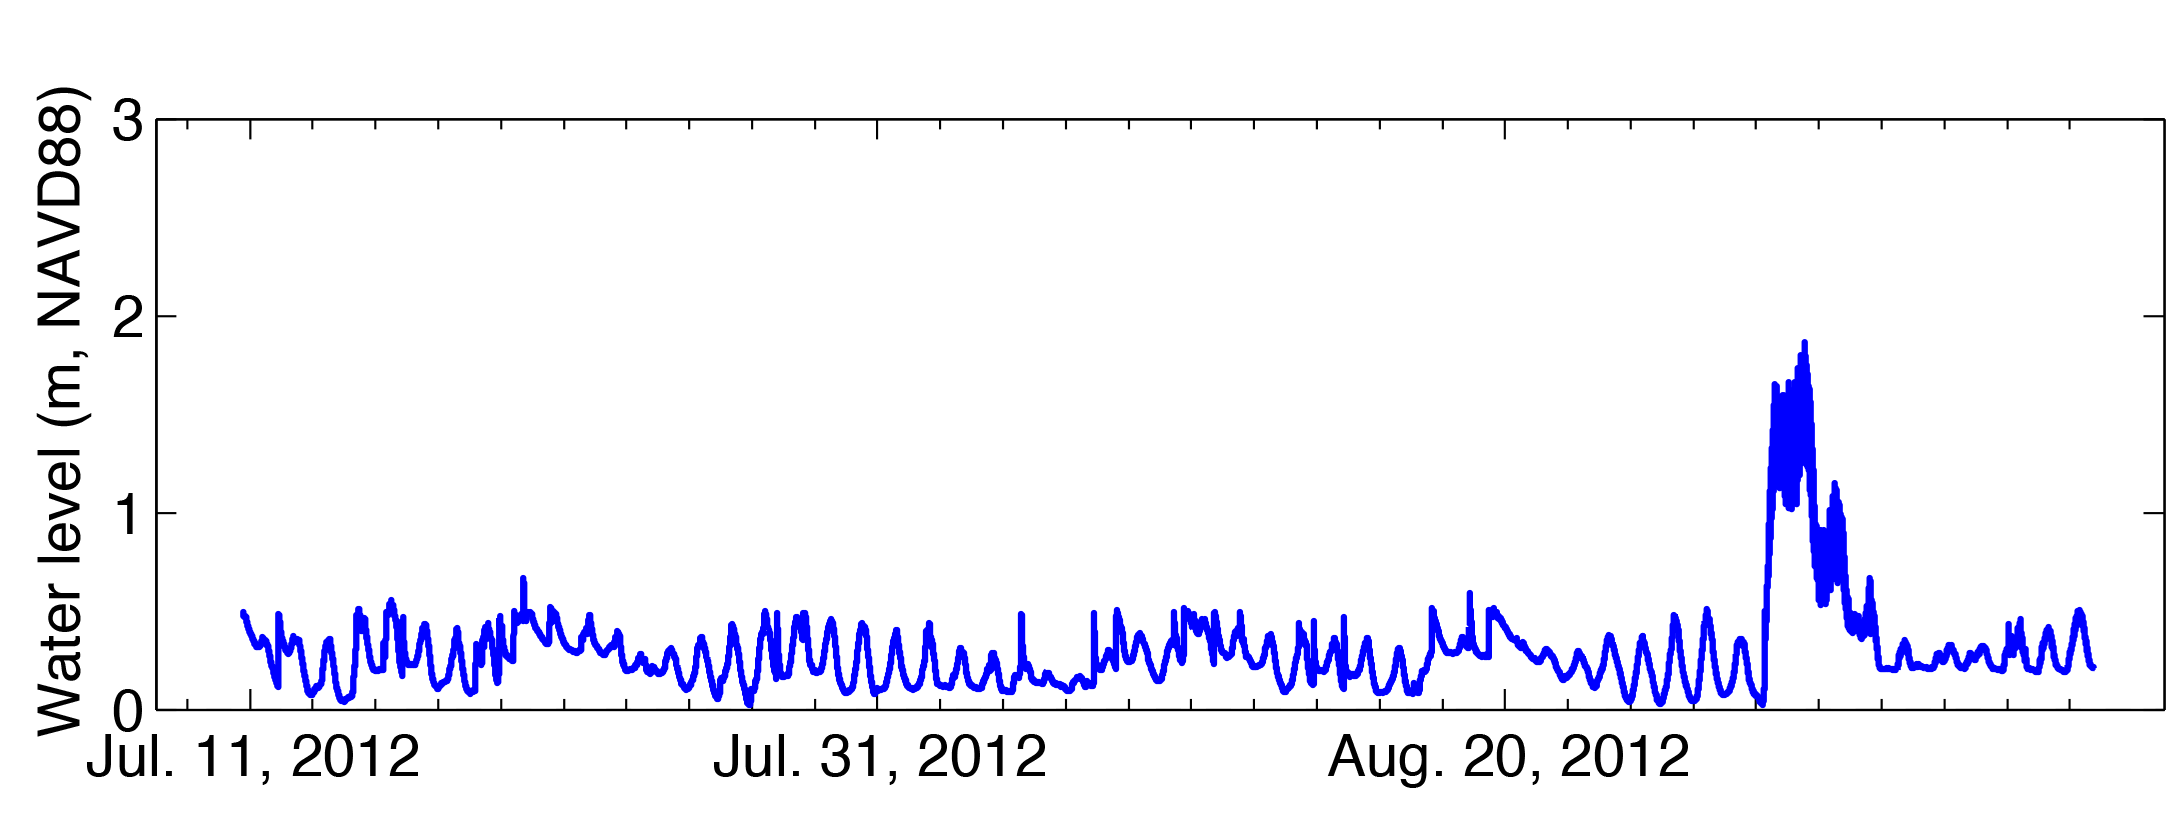 water level time series from a pressure logger mounted in a buried well